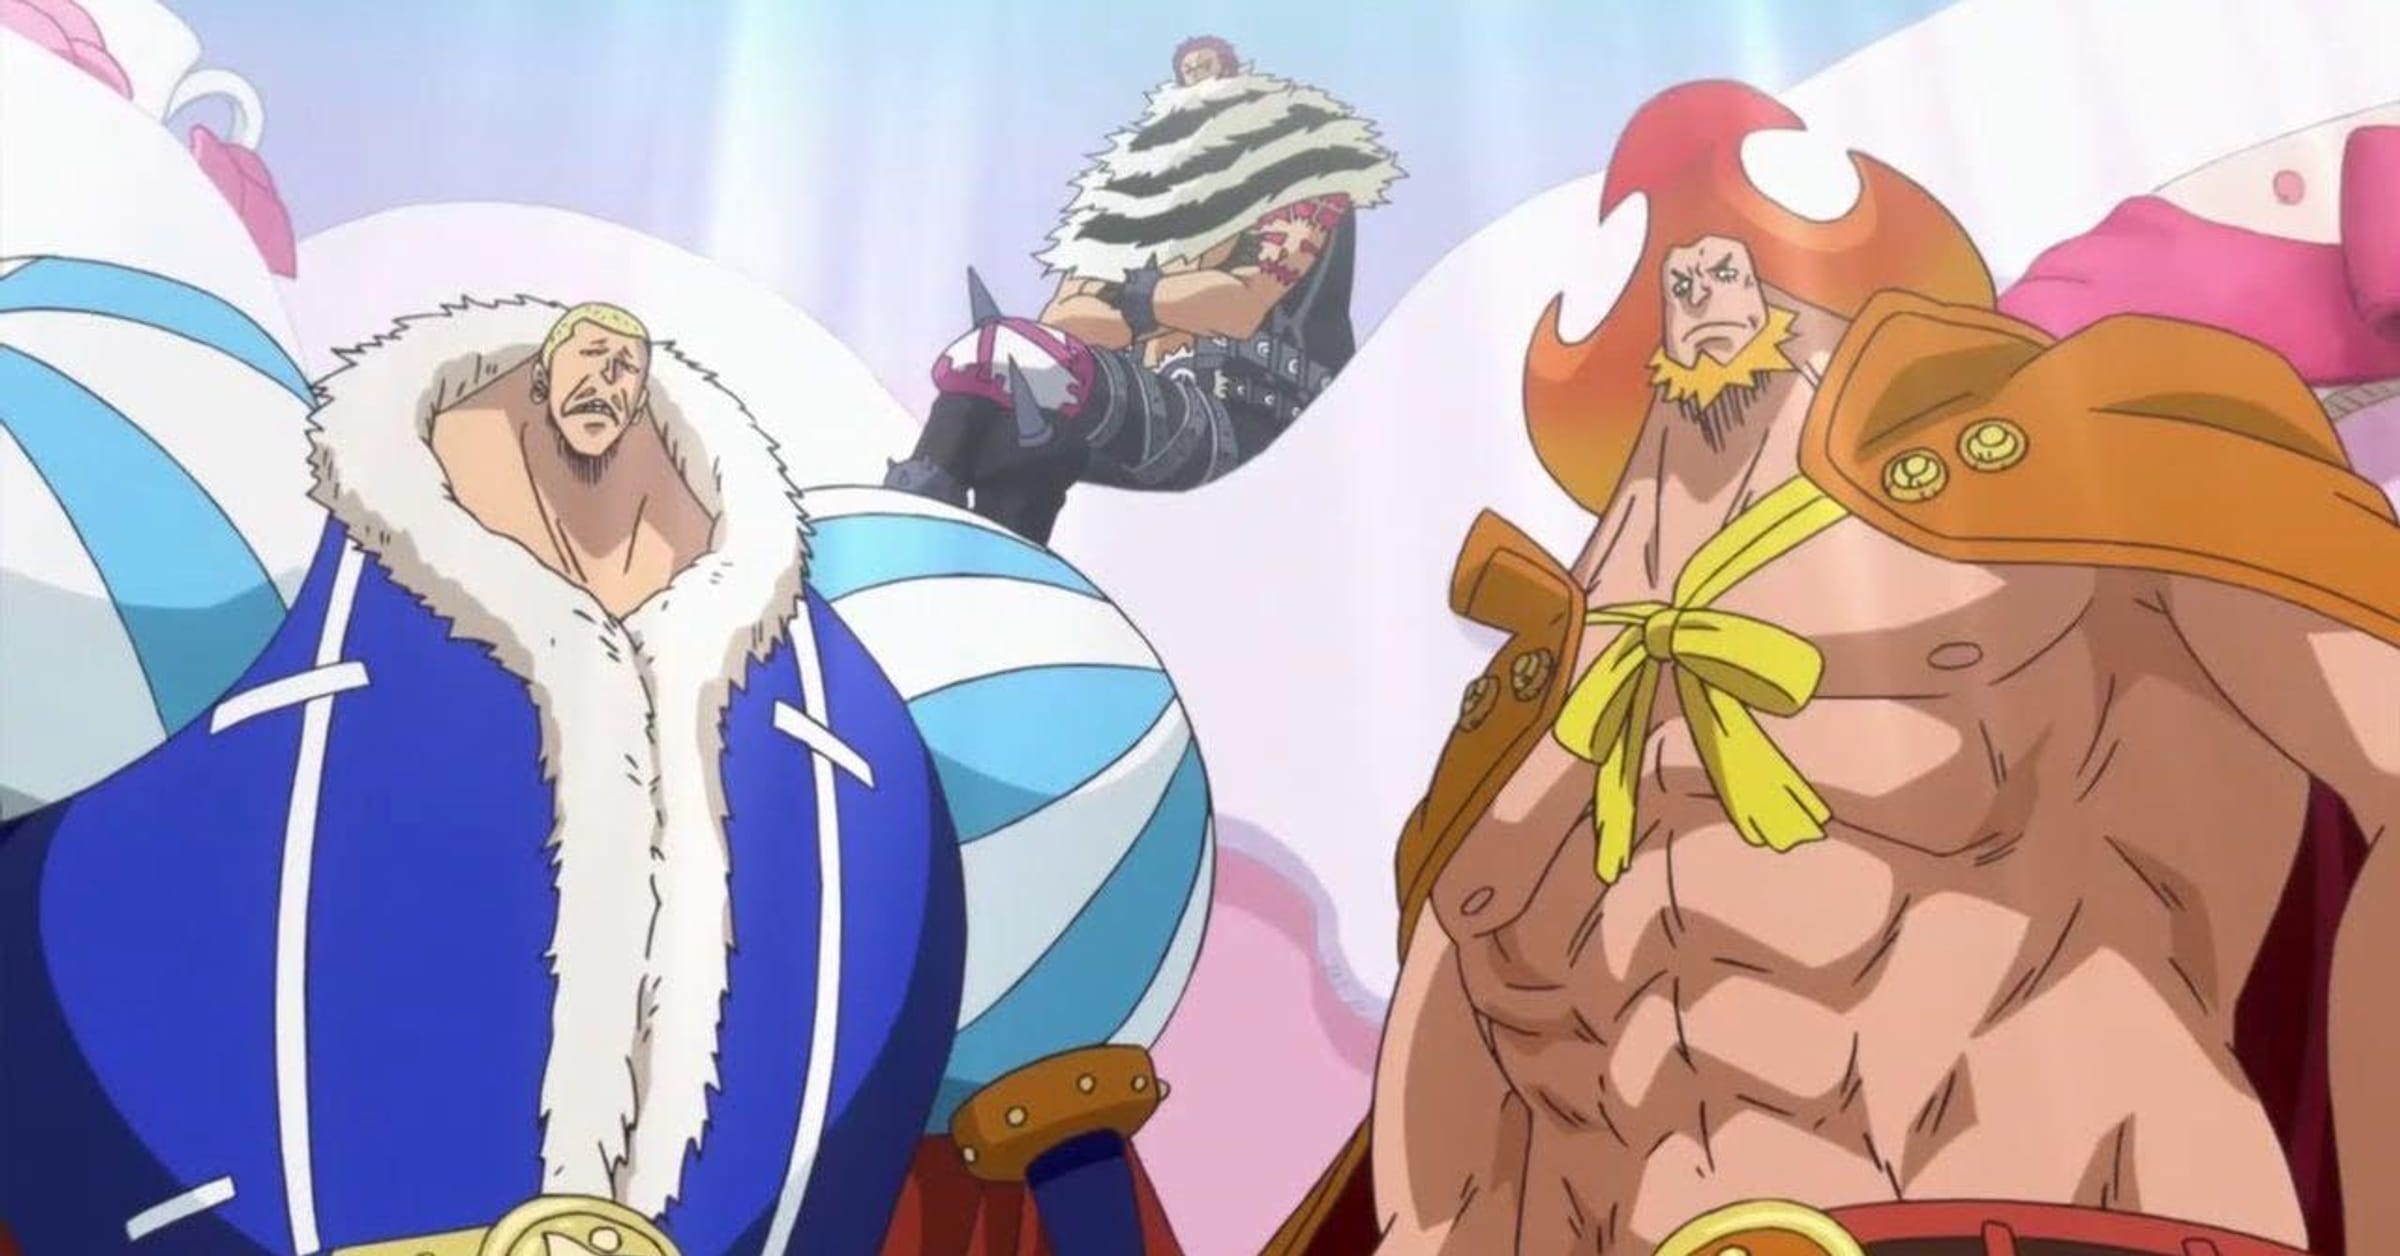 OnePiece- Articles and Theories : OnePiece